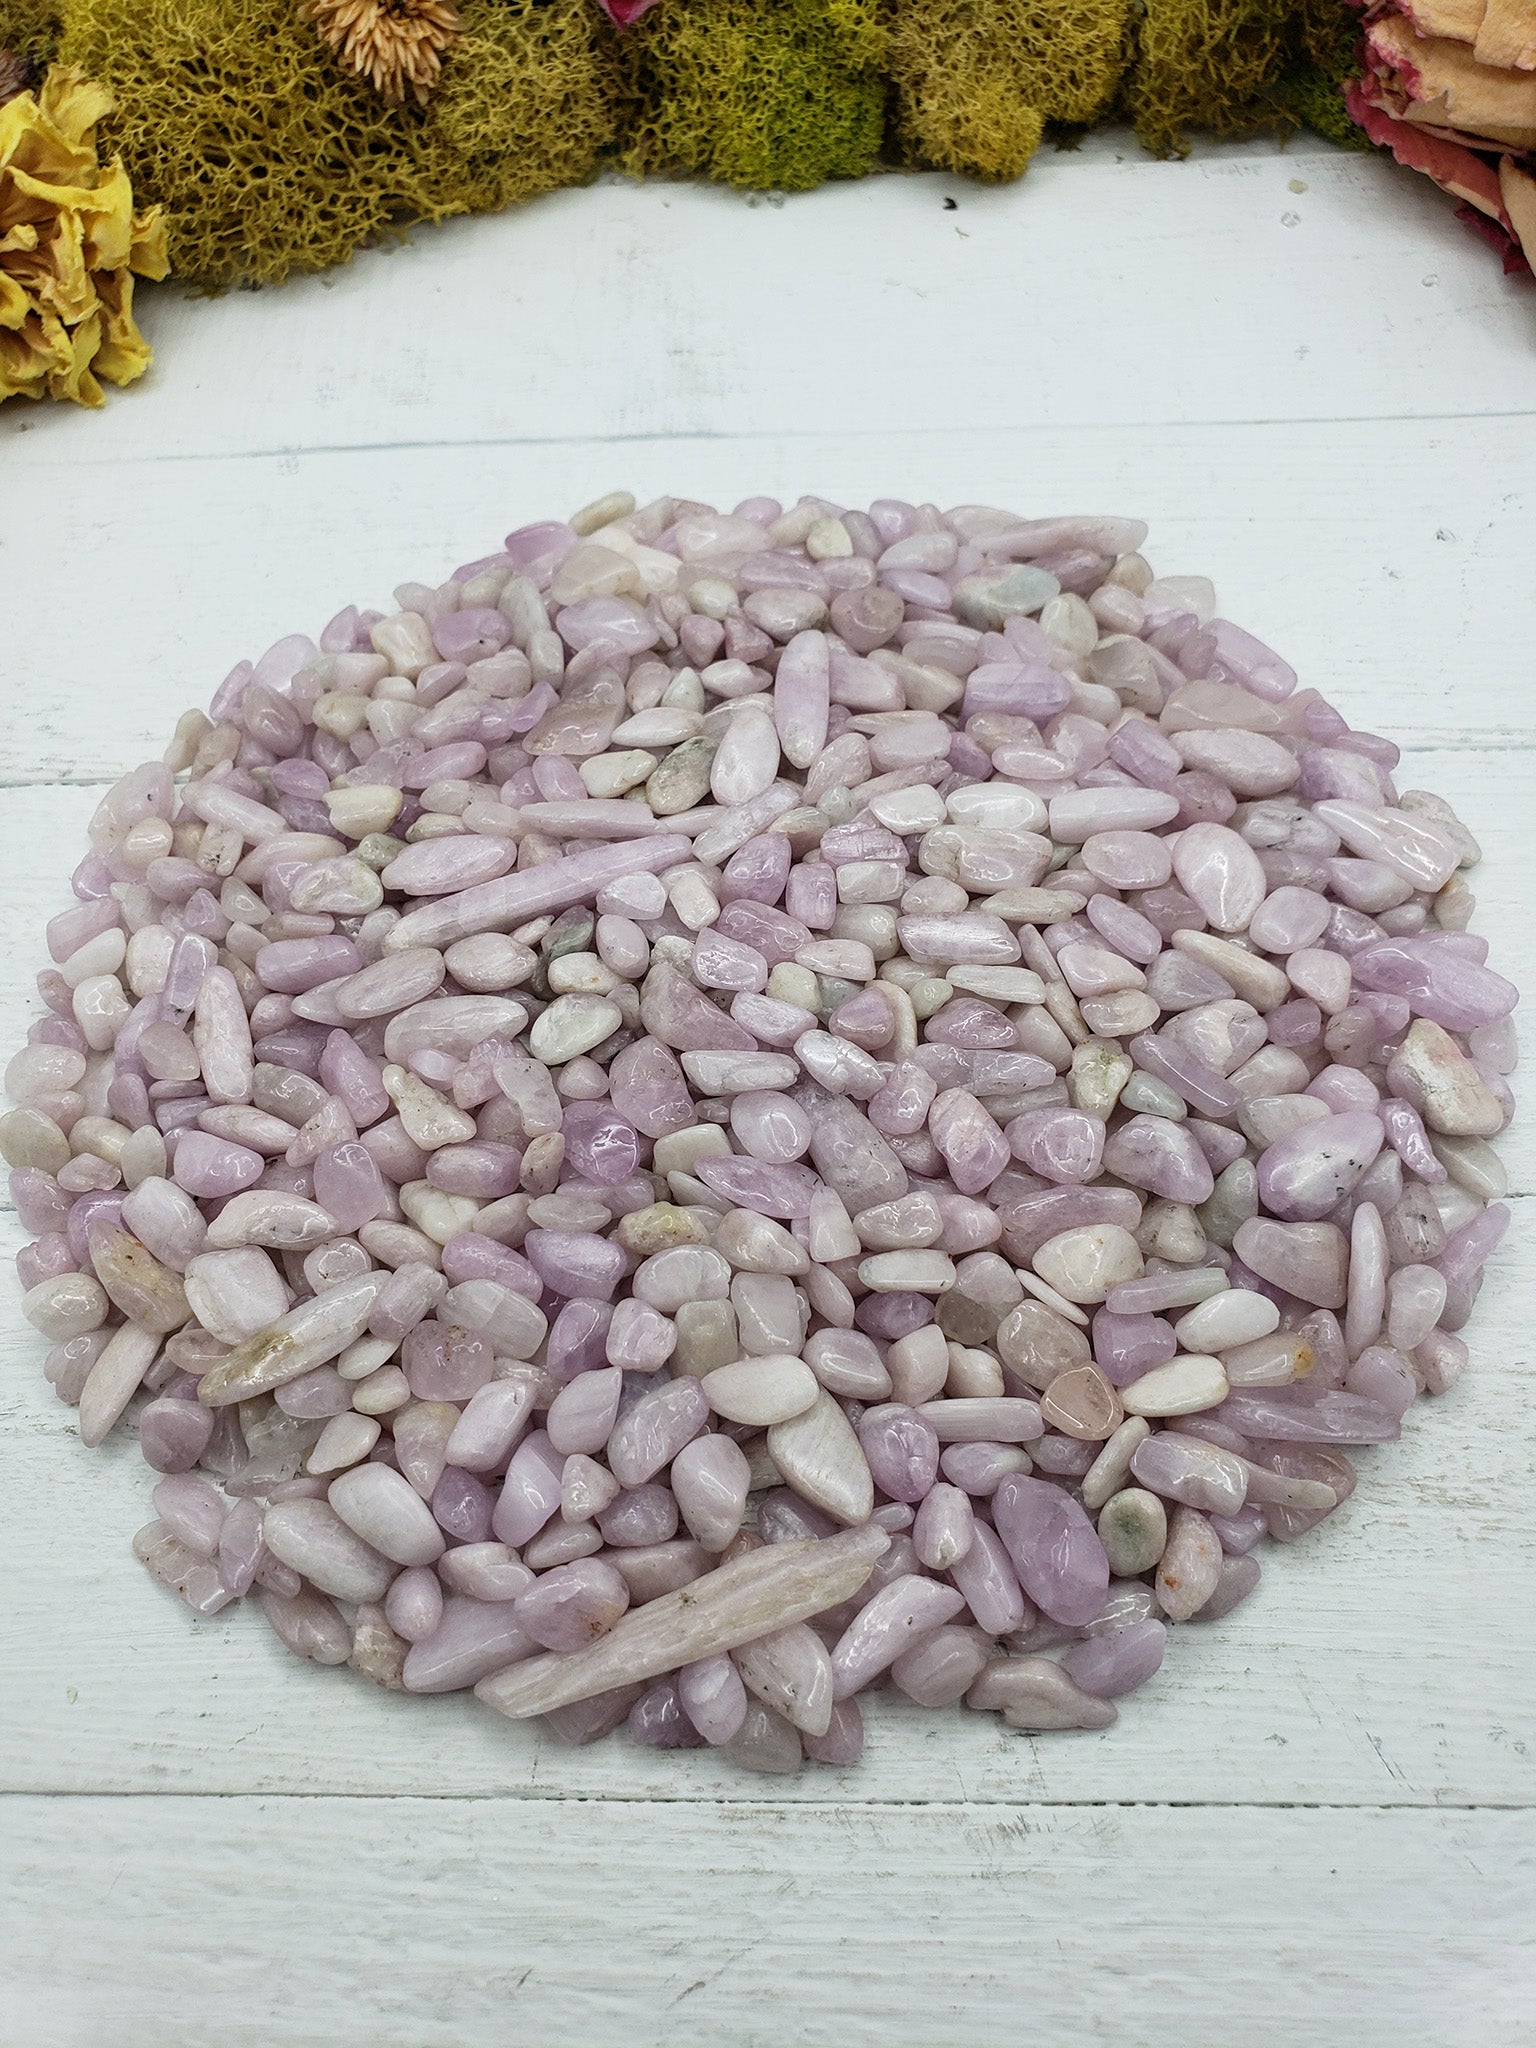 Pile of eight ounce kunzite crystal chips